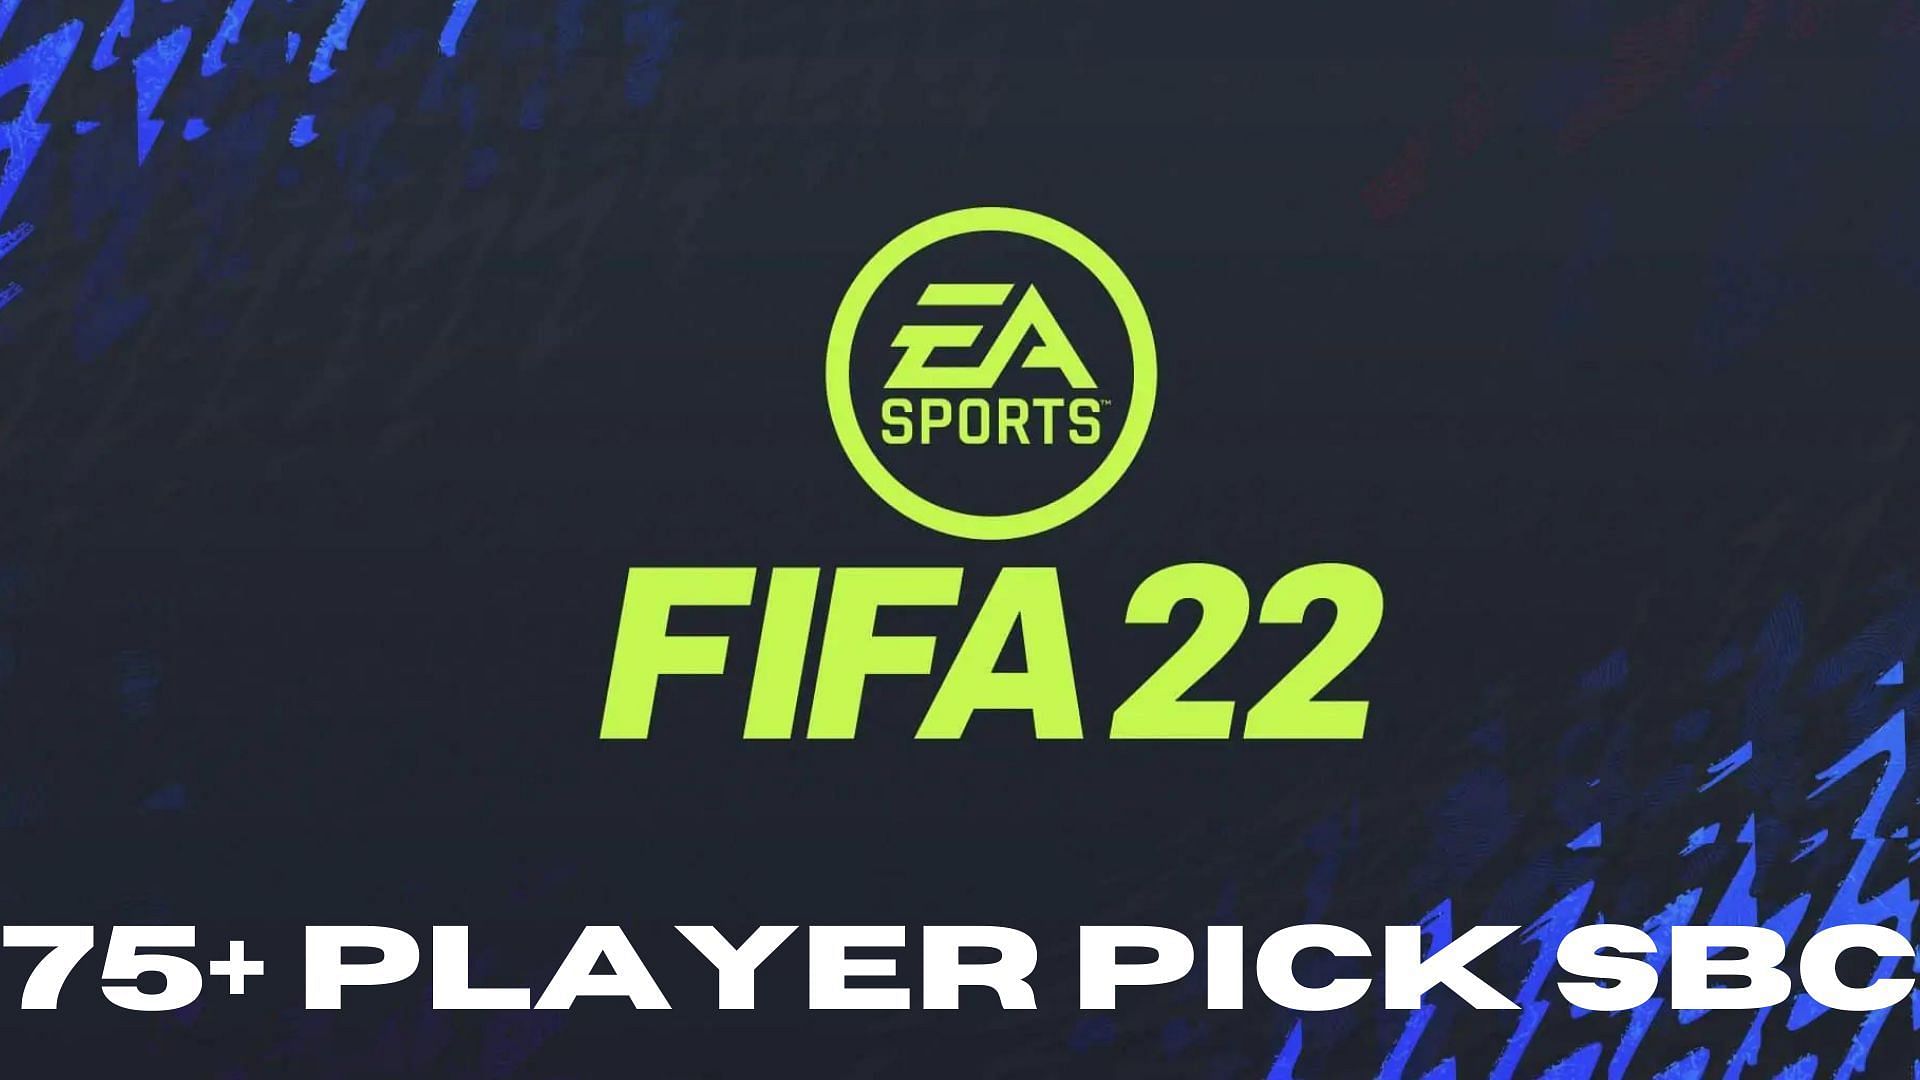 75+ Player Pick is now live in FIFA 22 (Image via Sportskeeda)